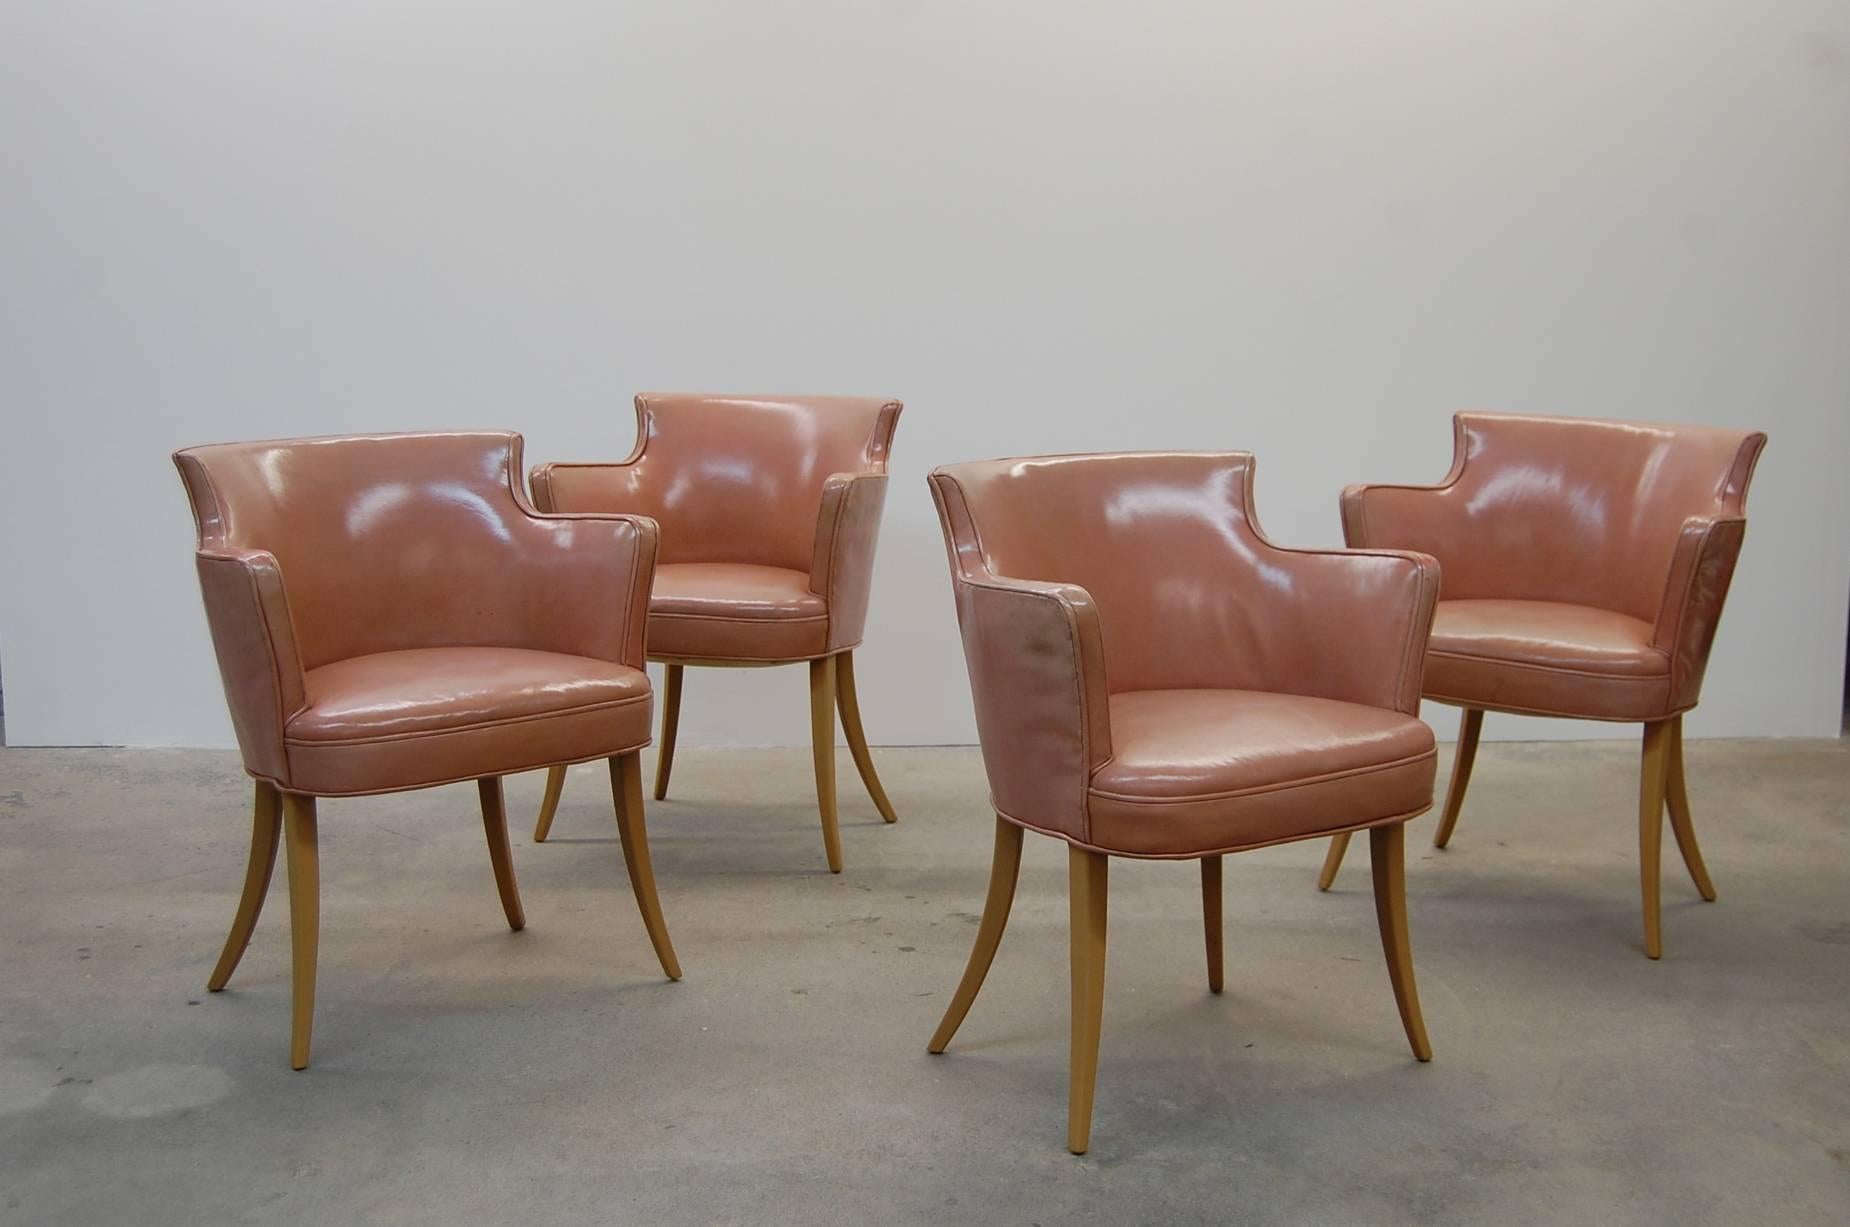 Set of four early Edward Wormley designed dining chairs, in original leather, circa 1945. Listing is for the set of four, but these would make wonderful occasional chairs, so would also sell in pairs. Price is for the set of four. Chairs measure 24